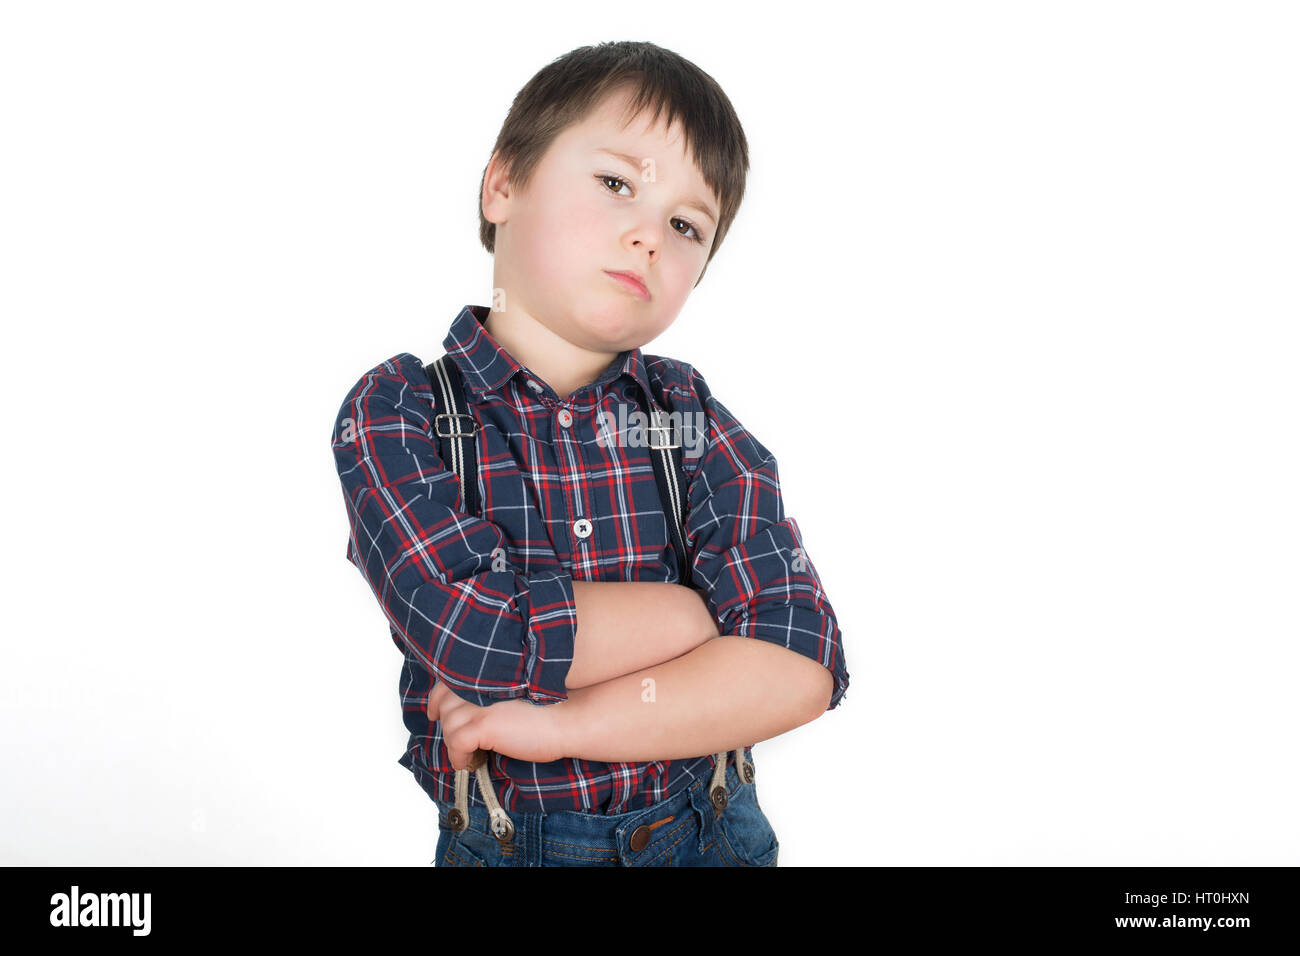 Little stubborn boy standing with crossed hands pretending he is a tough guy. Isolated on a white background. Stock Photo